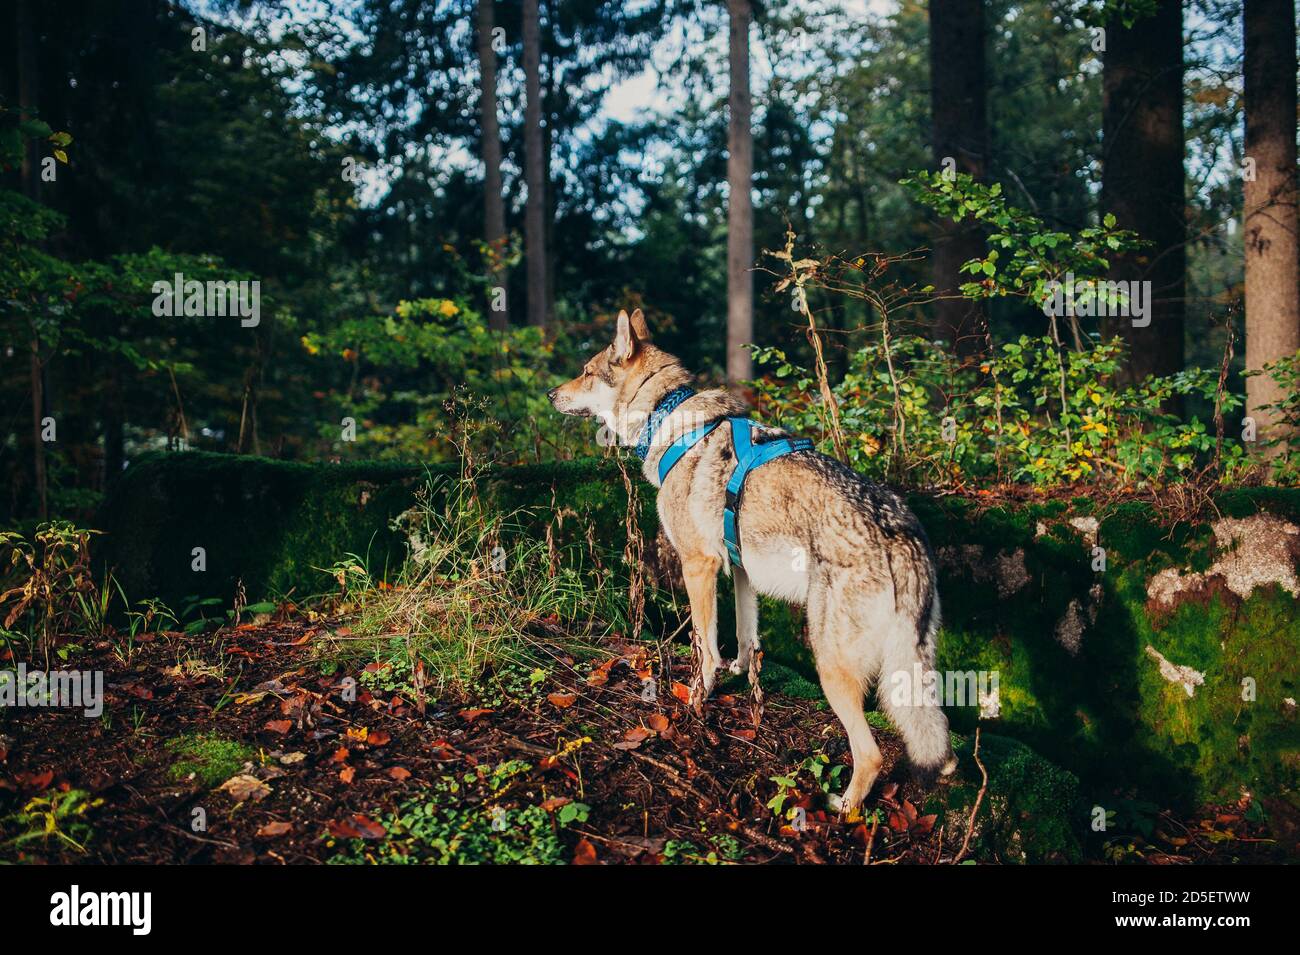 View of wolfdog with harness standing on the ground Stock Photo